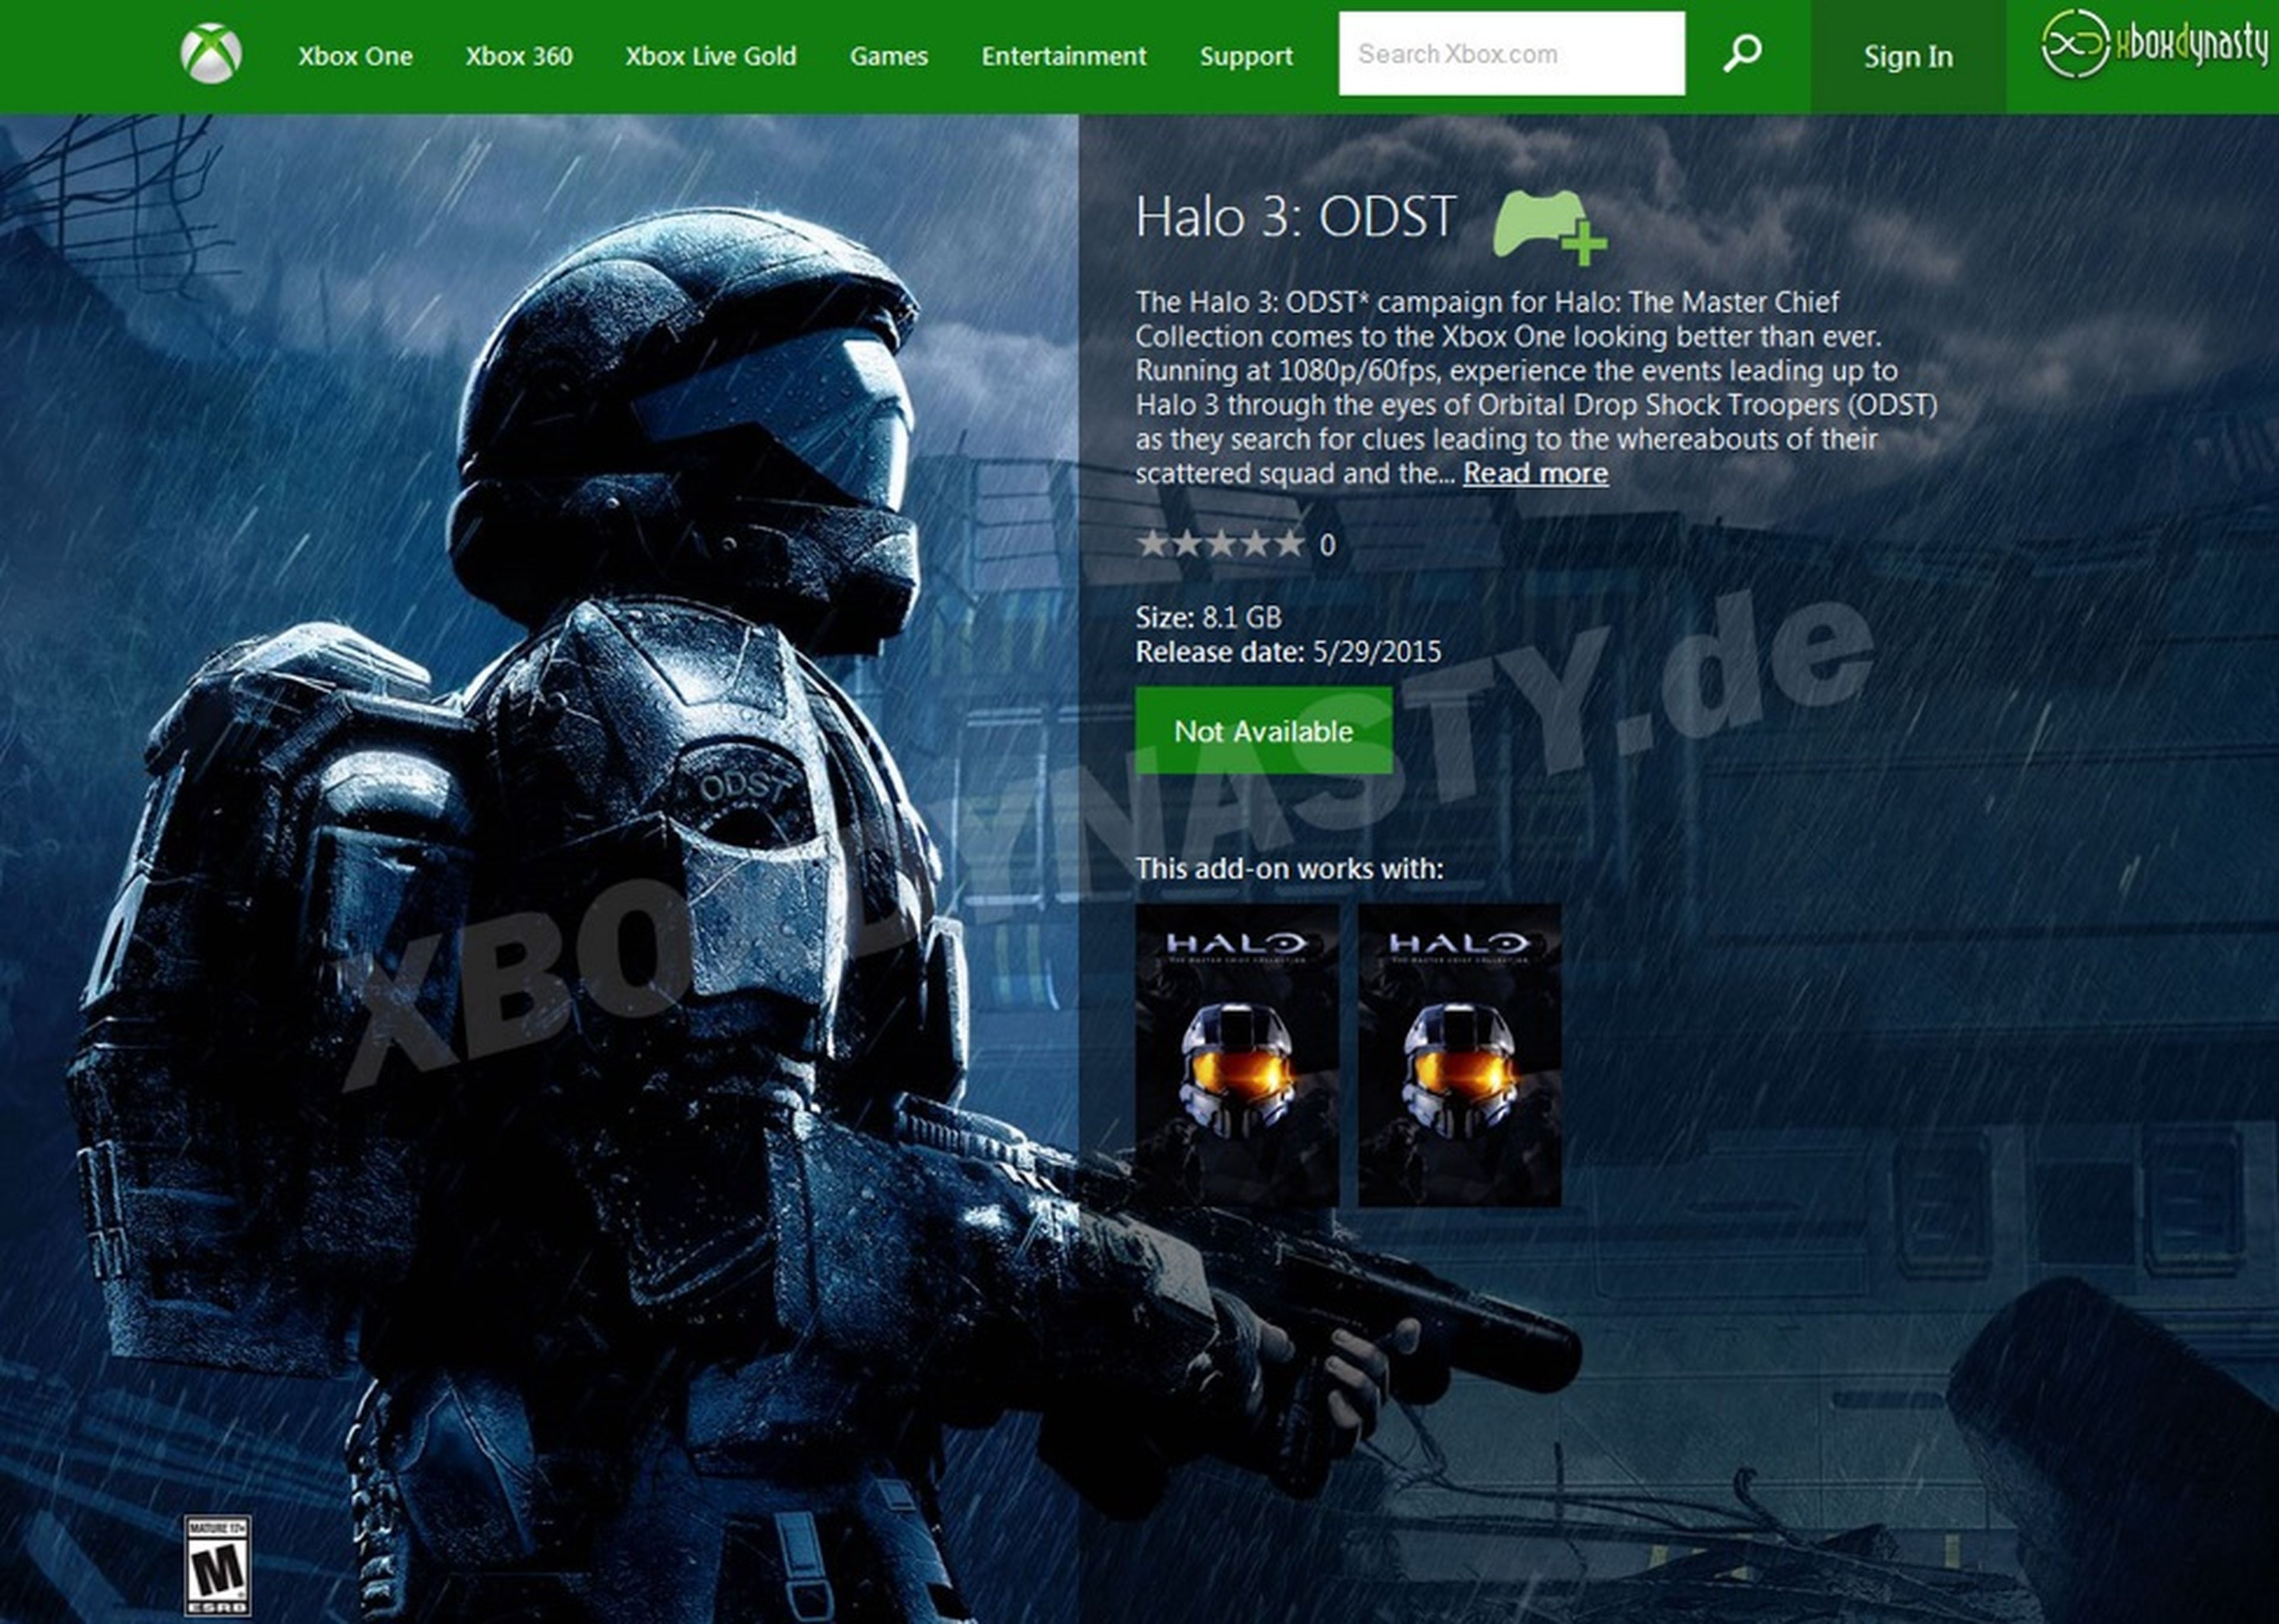 Halo The Master Chief Collection: Ya disponible Halo 3 ODST